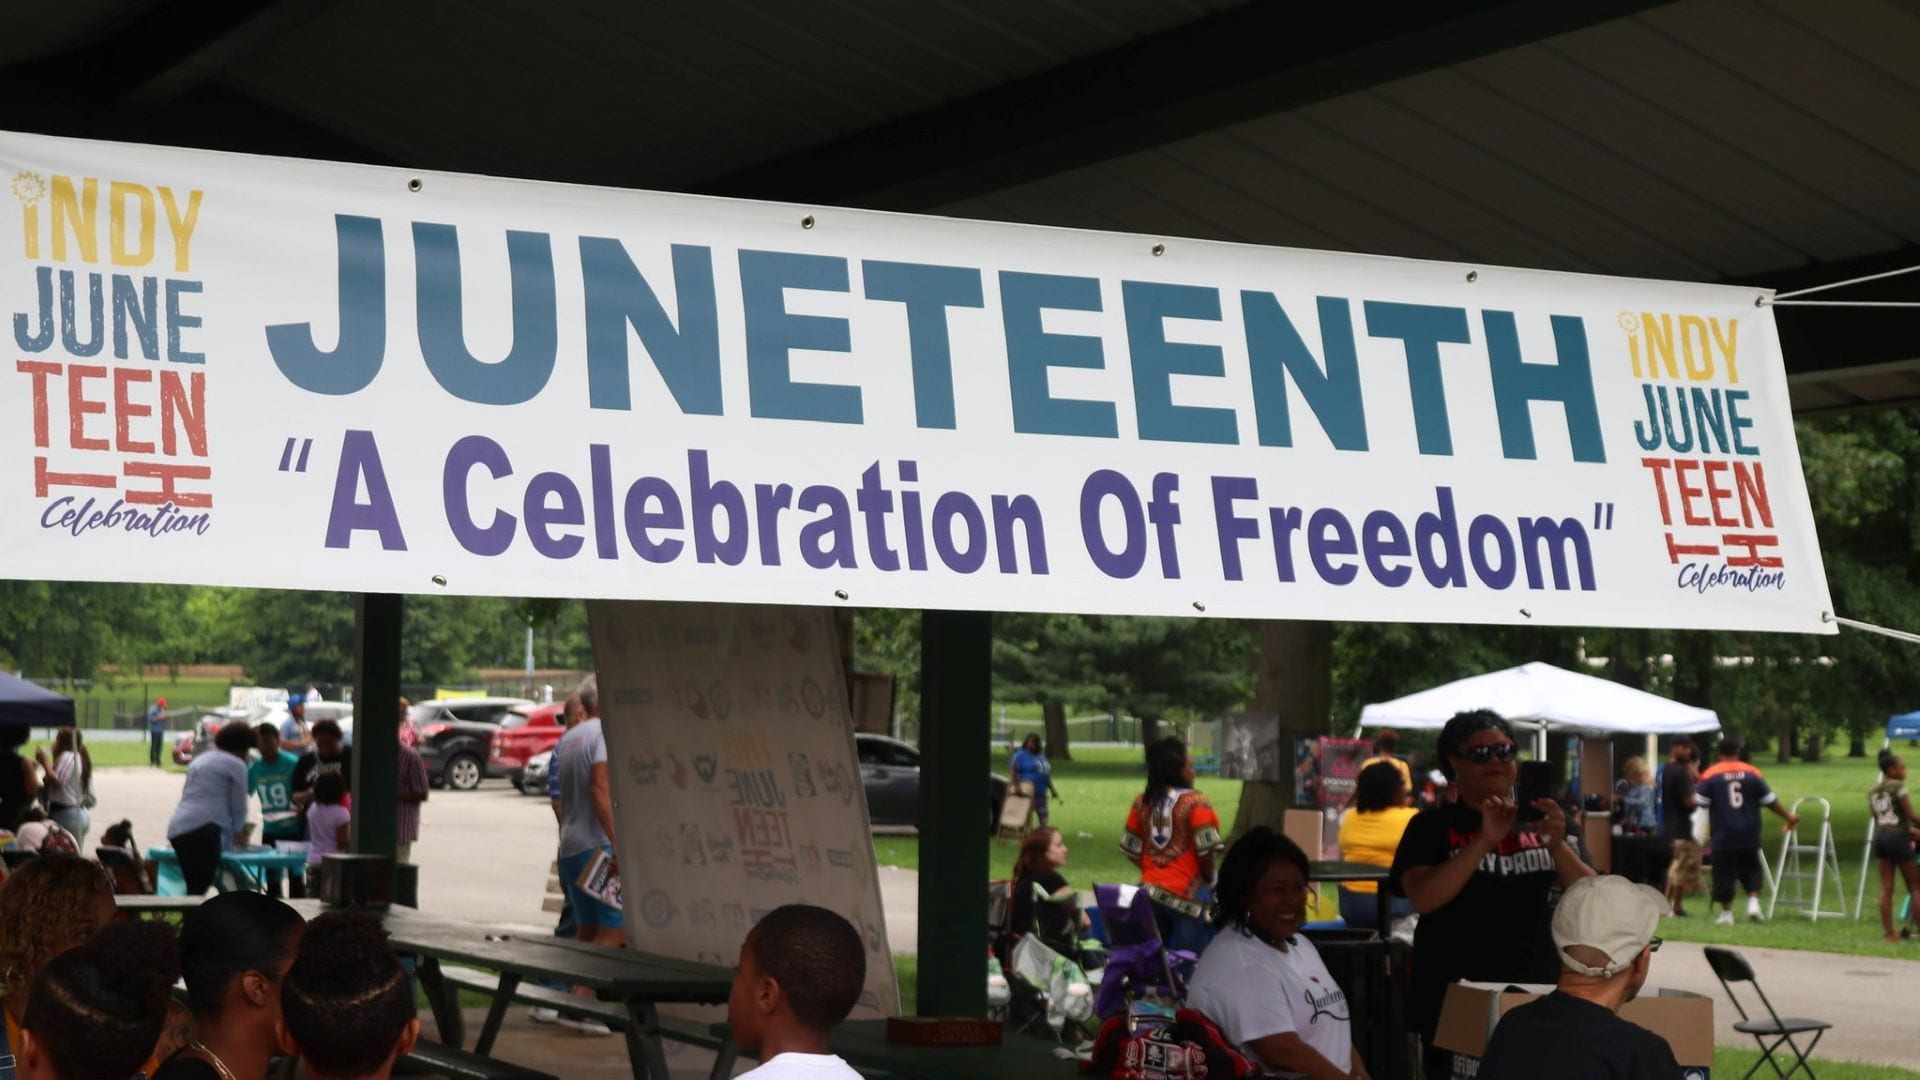 Juneteenth, commemorating the end of slavery, is America’s newest federal holiday. It should serve to celebrate an occasion in which liberty and hope prevailed over injustice.